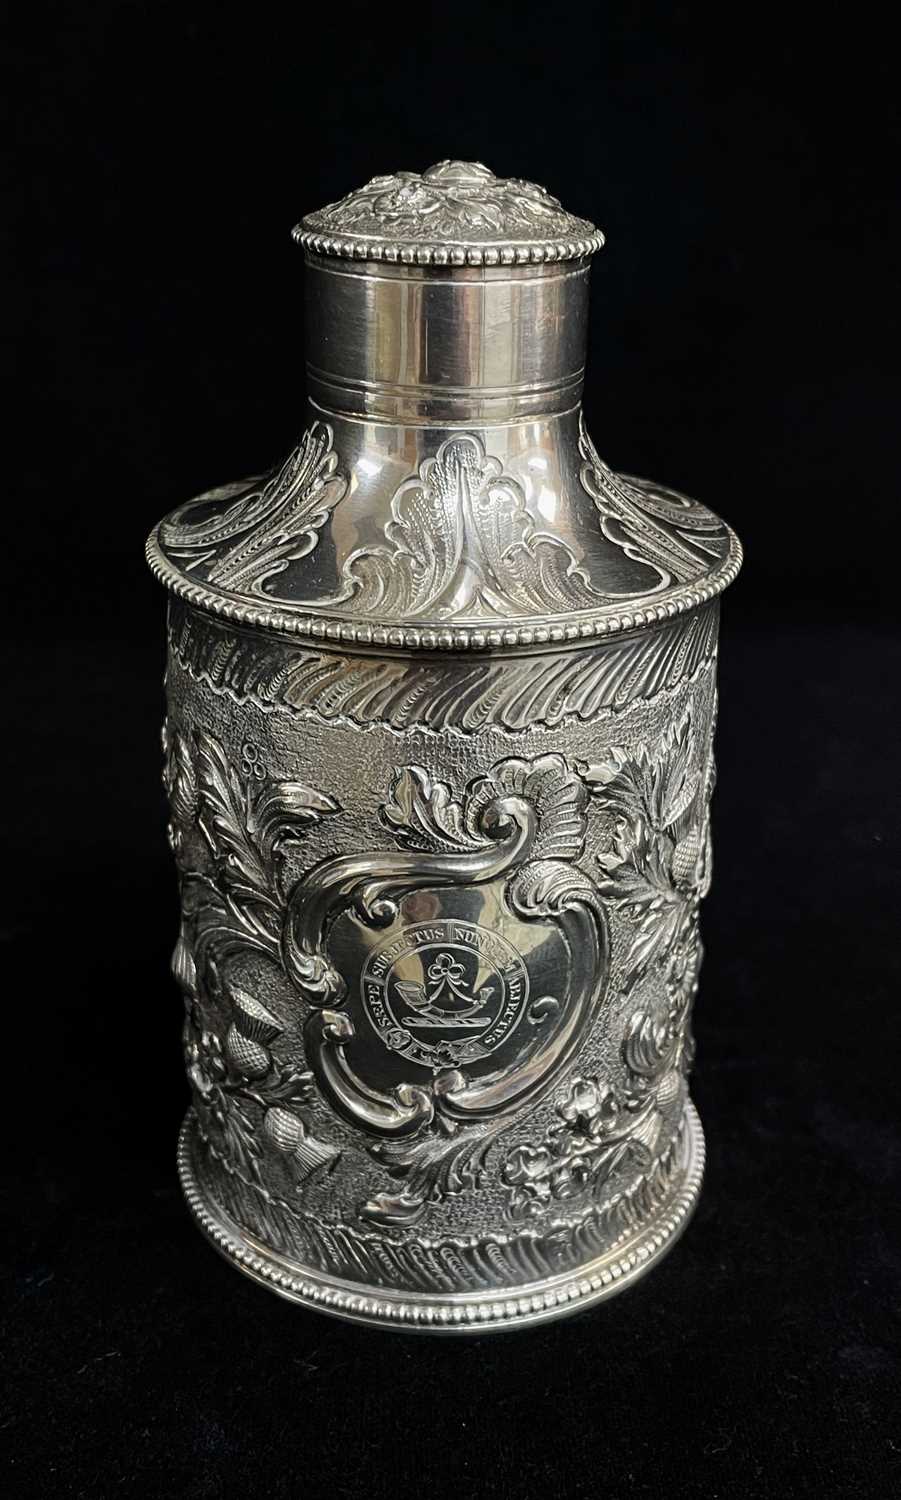 GEORGE III SILVER TEA CADDY, Hester Bateman, London 1781, later decorated with embossed national